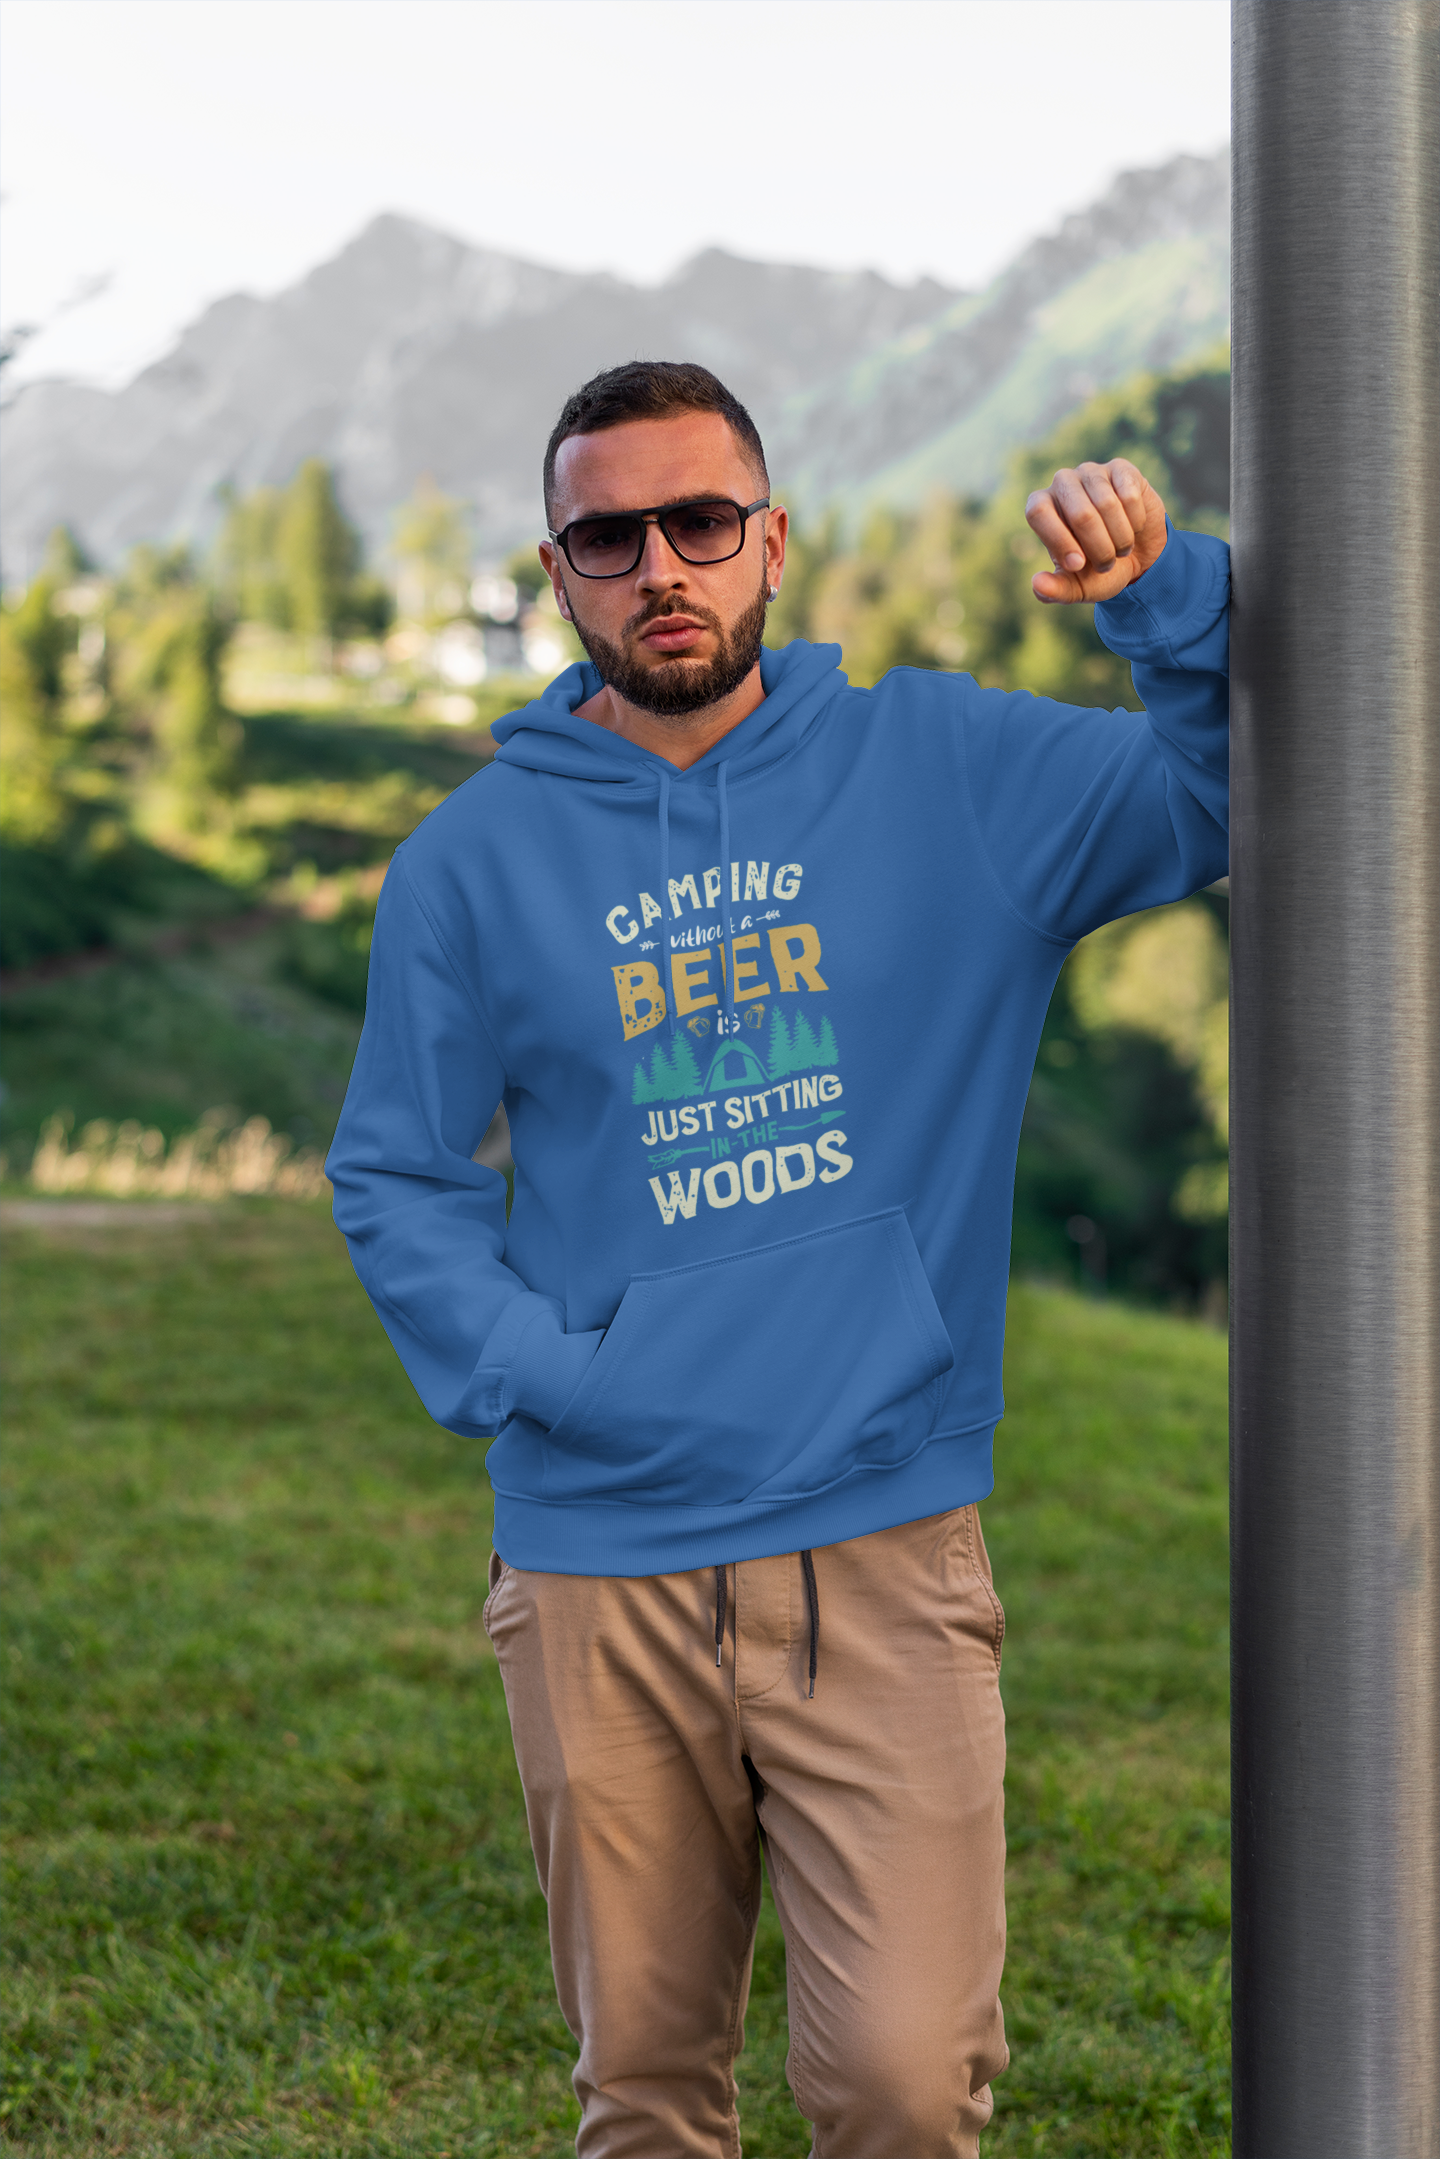 Camping without beer;Pull-over hoodie sweatshirt